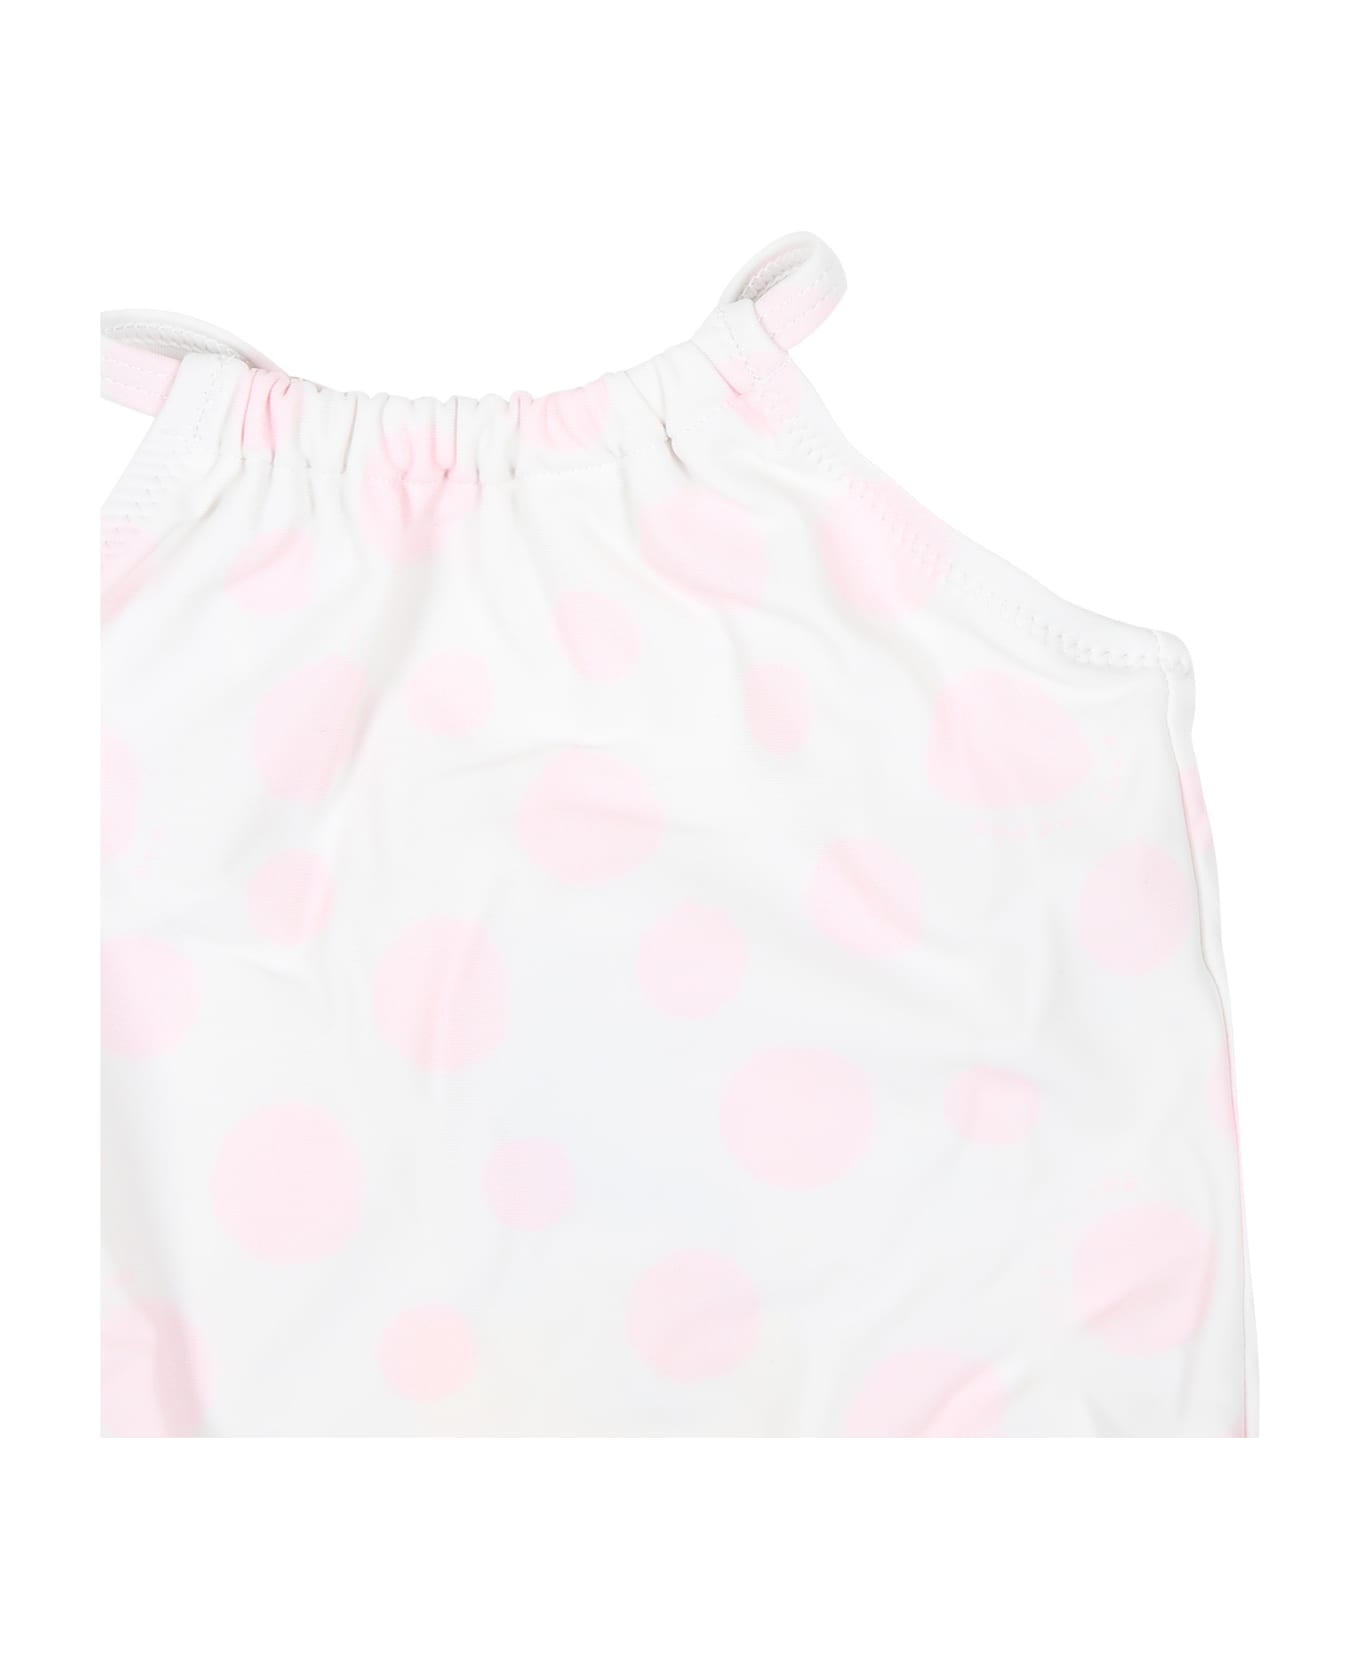 Marc Jacobs White One-piece Swimsuit For Baby Girl With Polka Dot Pattern - White